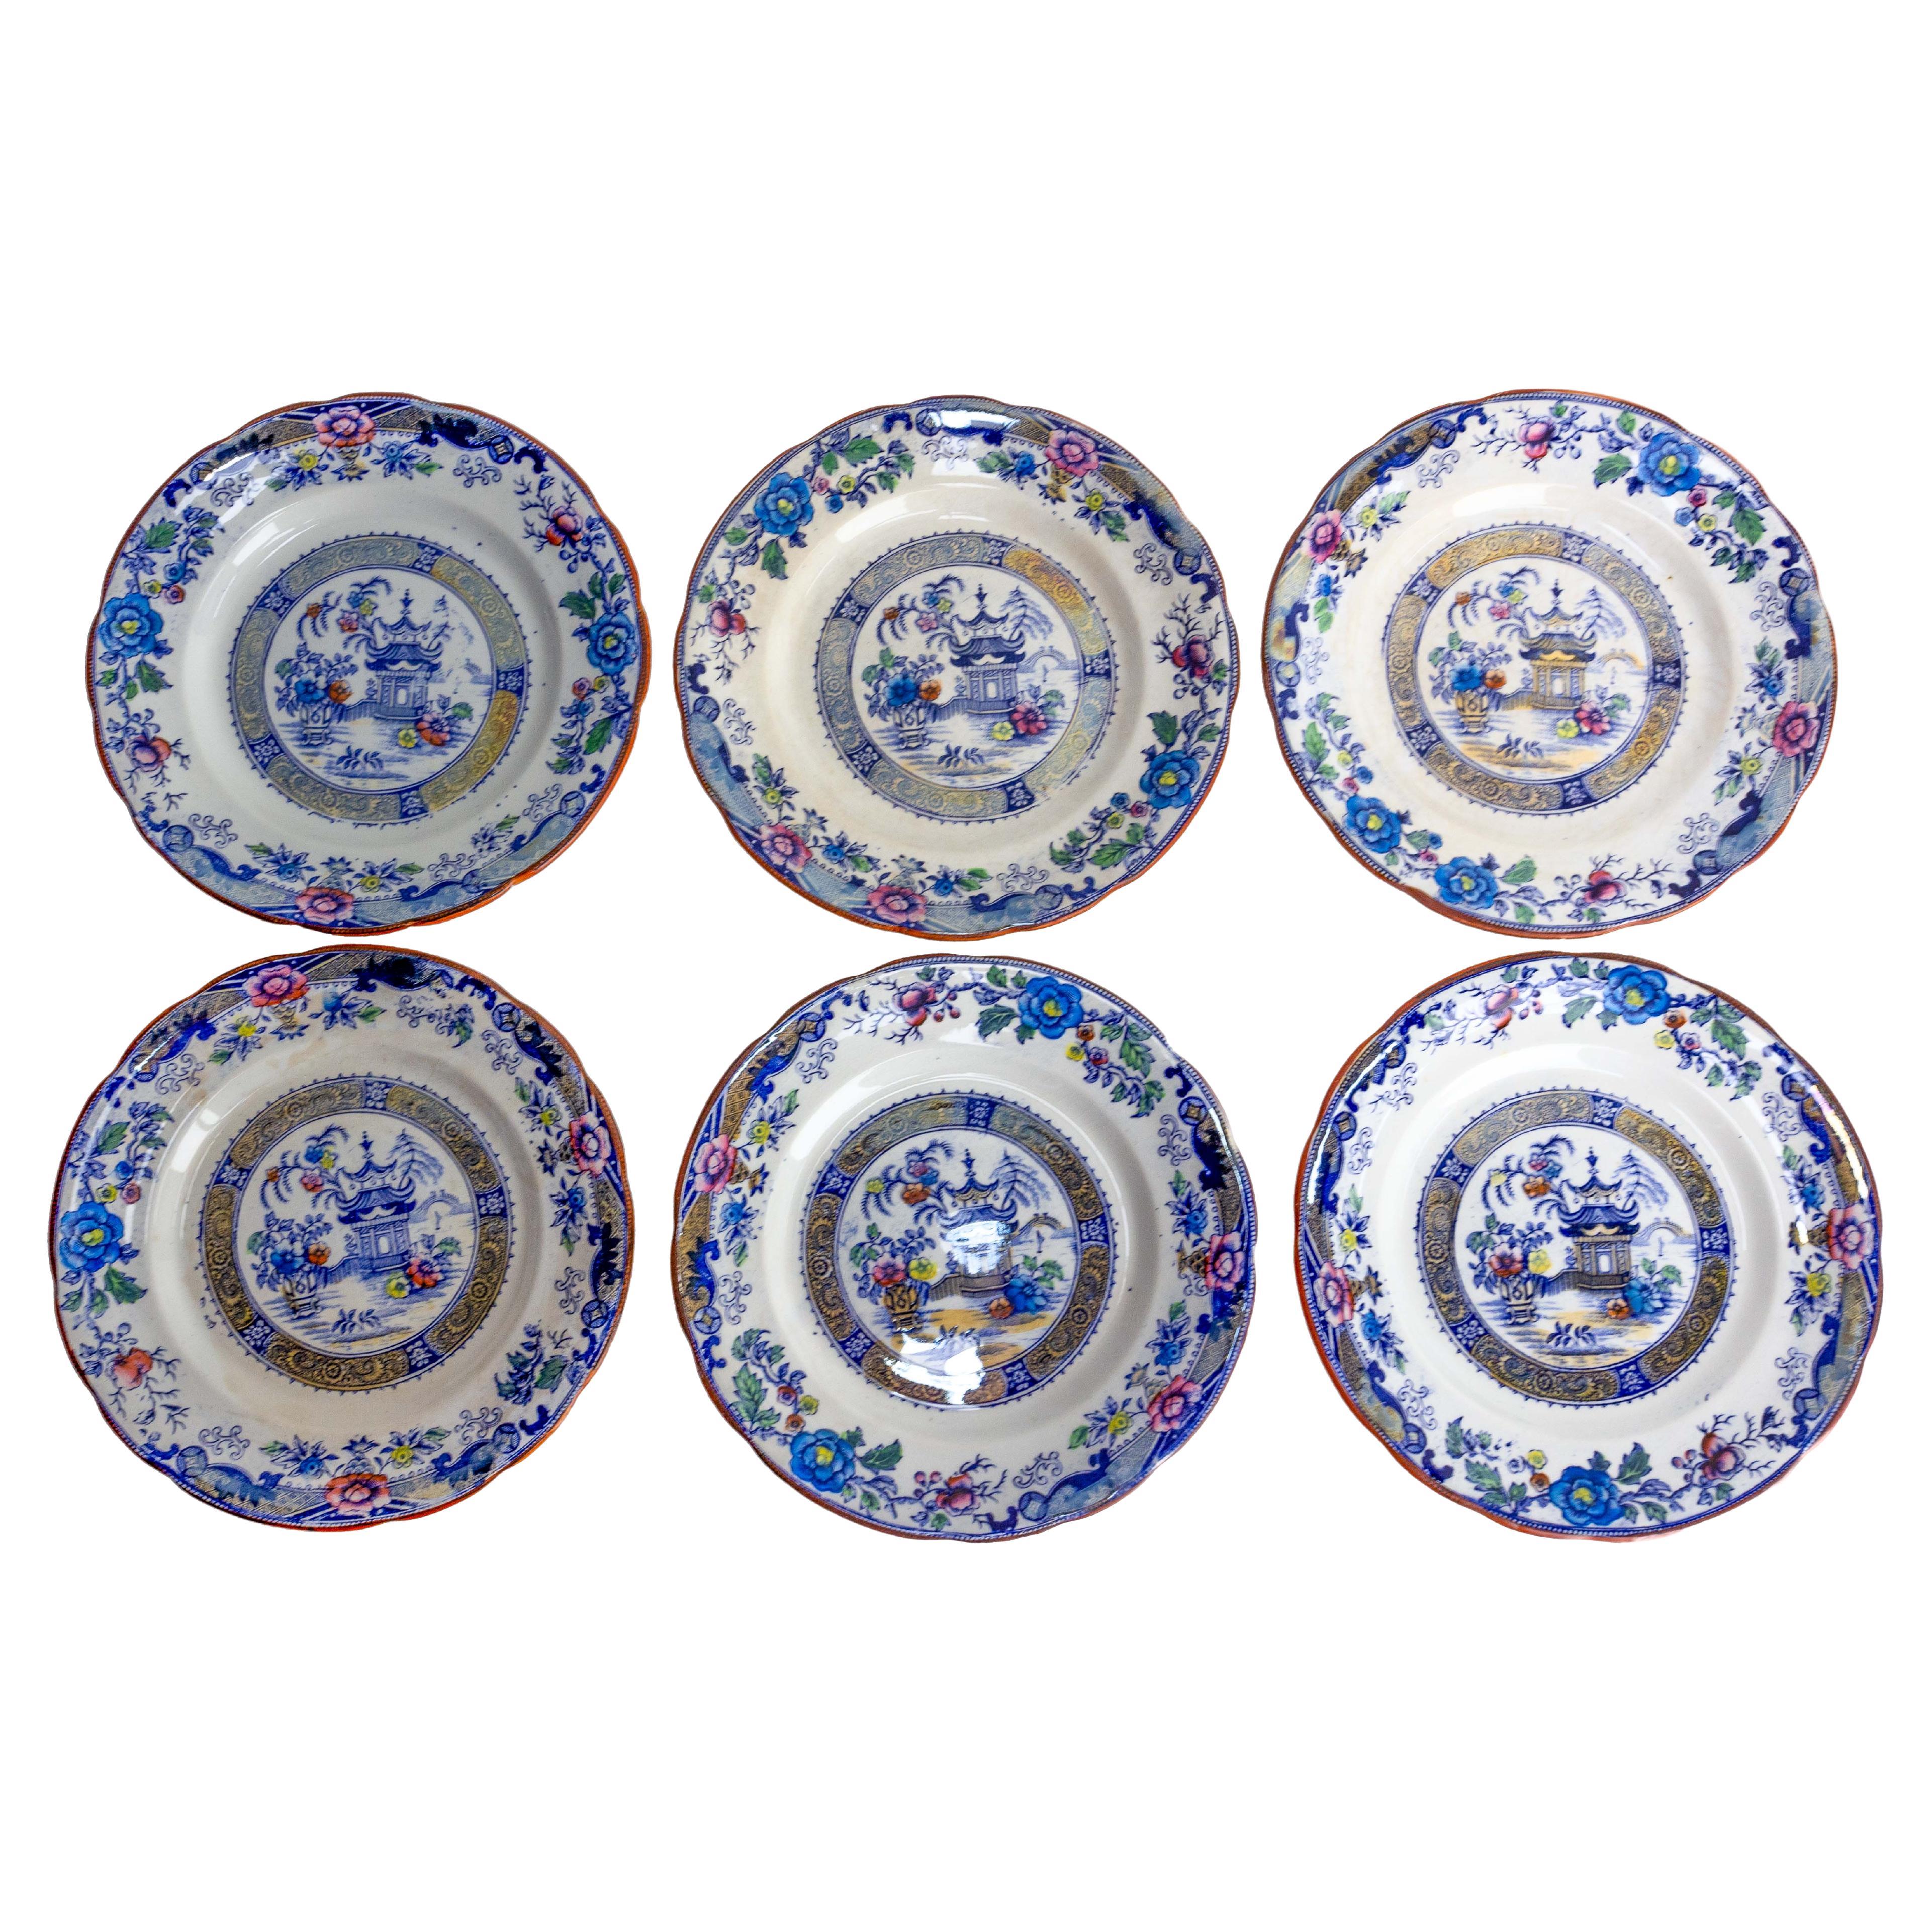 Set of Six Faience Plates Chinese Style, Bordeaux France, Late 19th Century